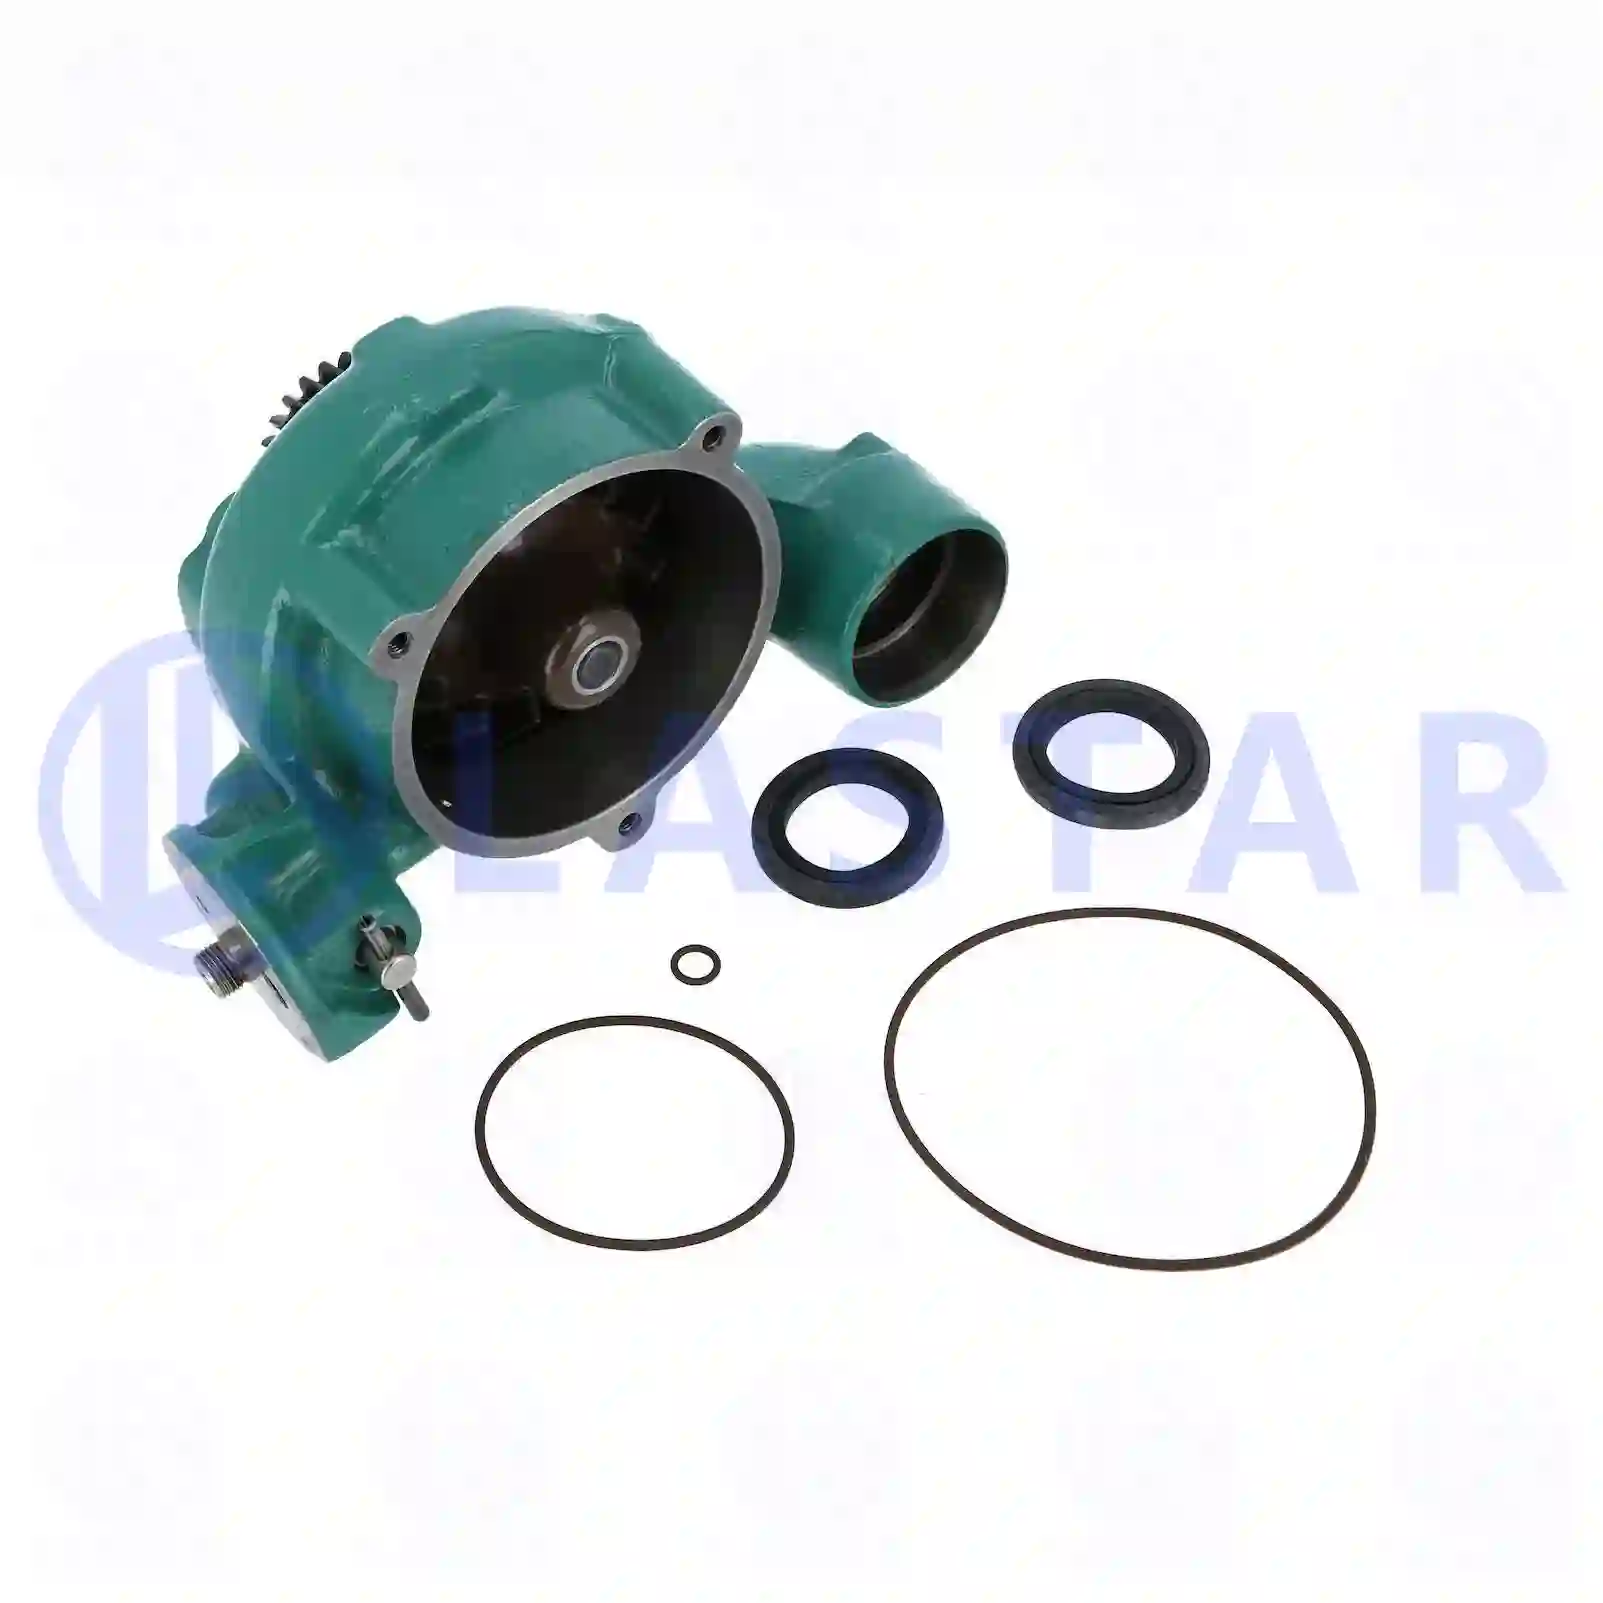 Water pump, for vehicles with retarder, 77708763, 1676713, 8112889, 8113155, 8149882, ZG00759-0008 ||  77708763 Lastar Spare Part | Truck Spare Parts, Auotomotive Spare Parts Water pump, for vehicles with retarder, 77708763, 1676713, 8112889, 8113155, 8149882, ZG00759-0008 ||  77708763 Lastar Spare Part | Truck Spare Parts, Auotomotive Spare Parts